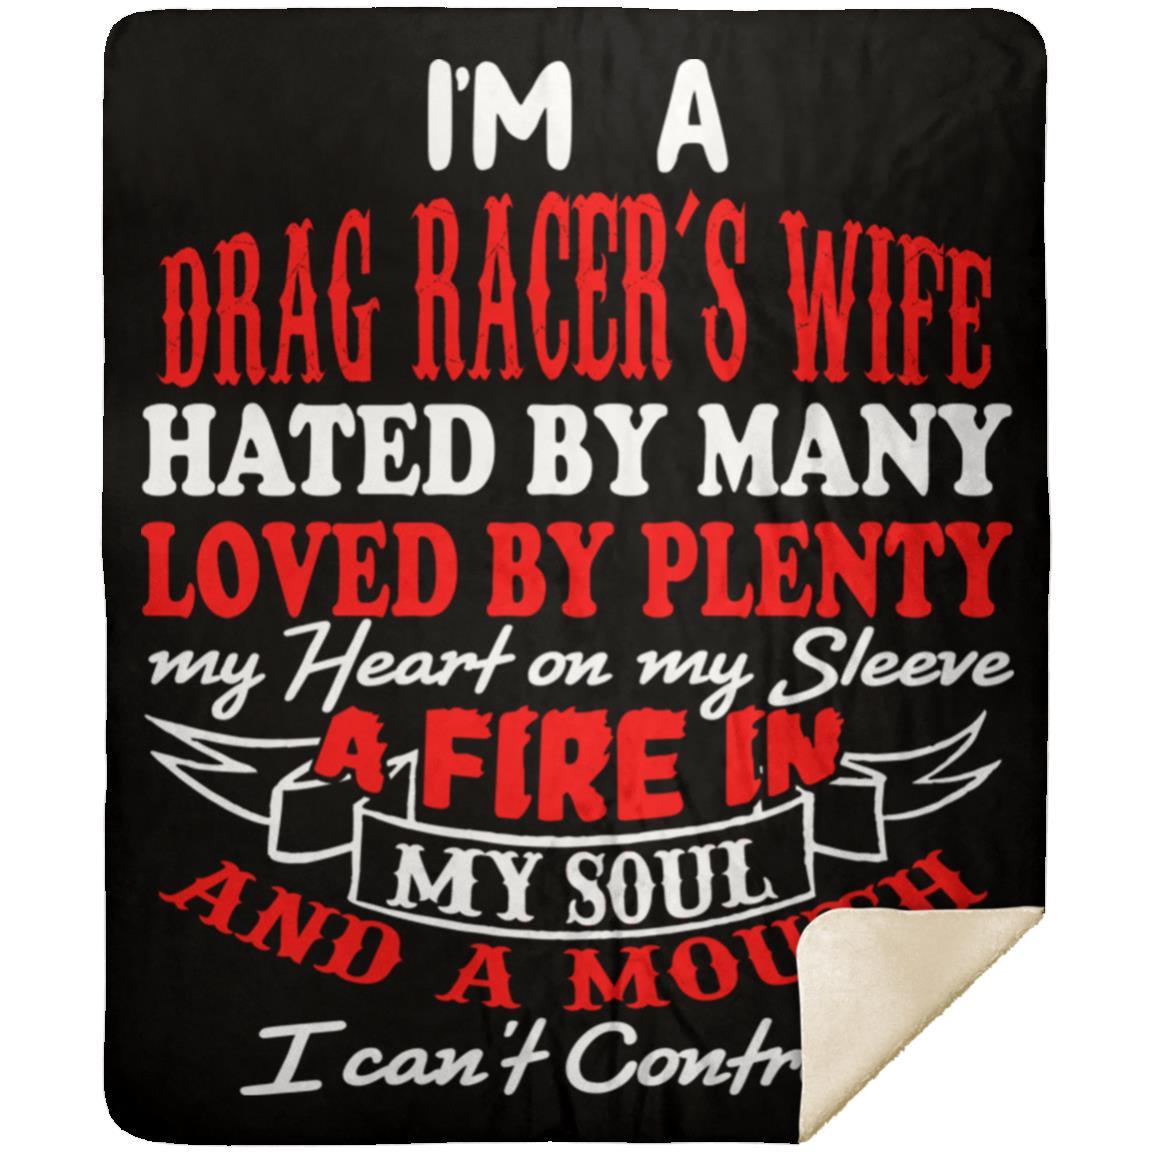 I'm A Drag Racer's Wife Hated By Many Loved By Plenty Premium Mink Sherpa Blanket 50x60